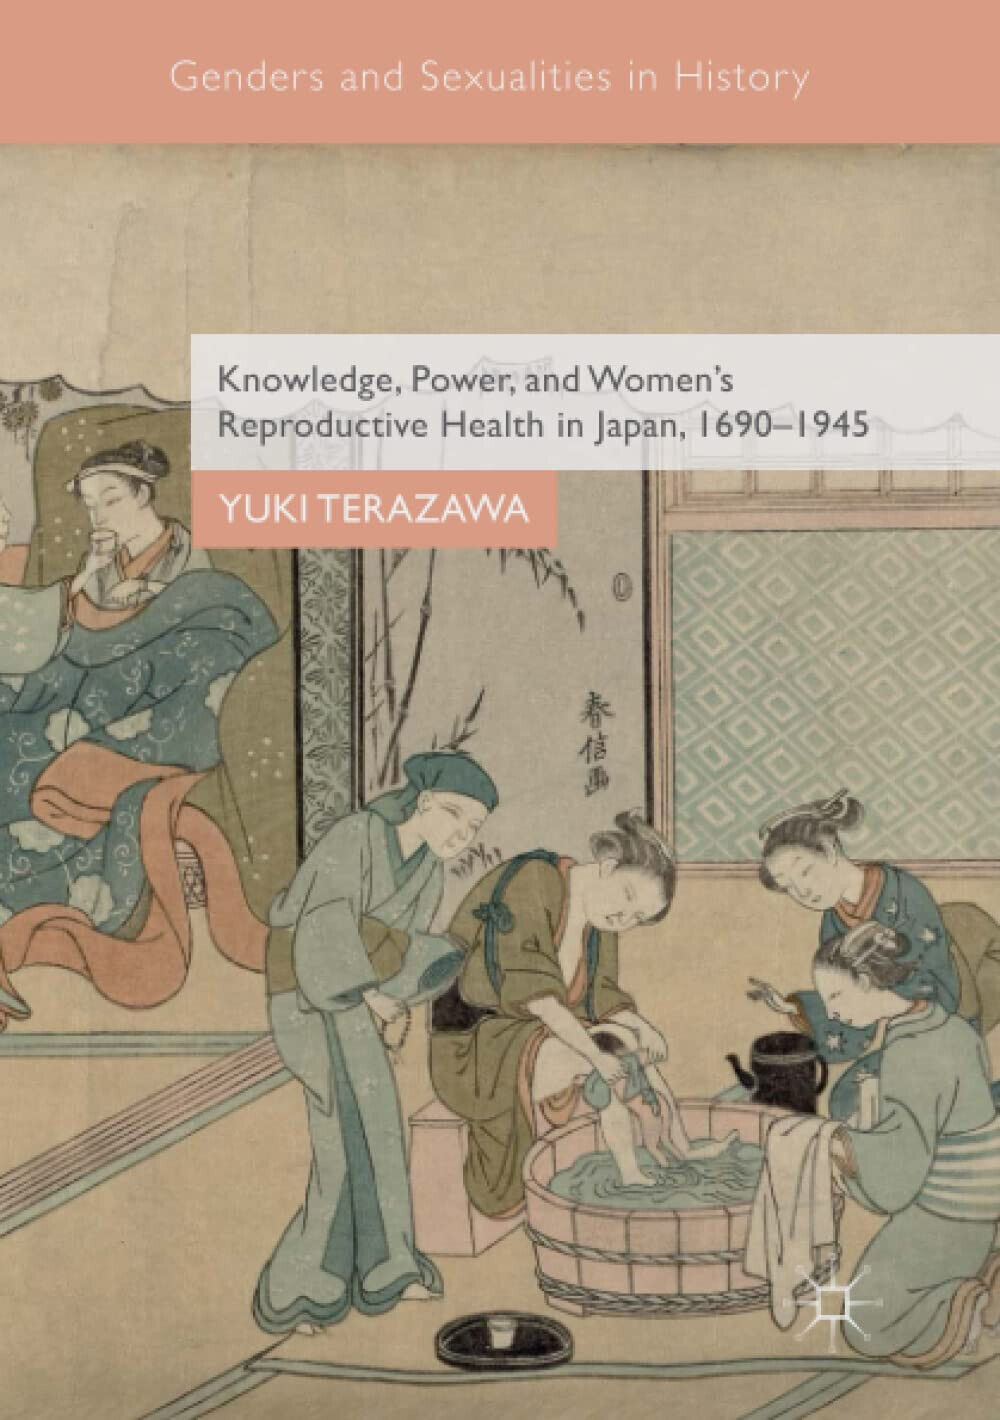 Knowledge, Power, and Women's Reproductive Health in Japan, 1690-1945 - 2018